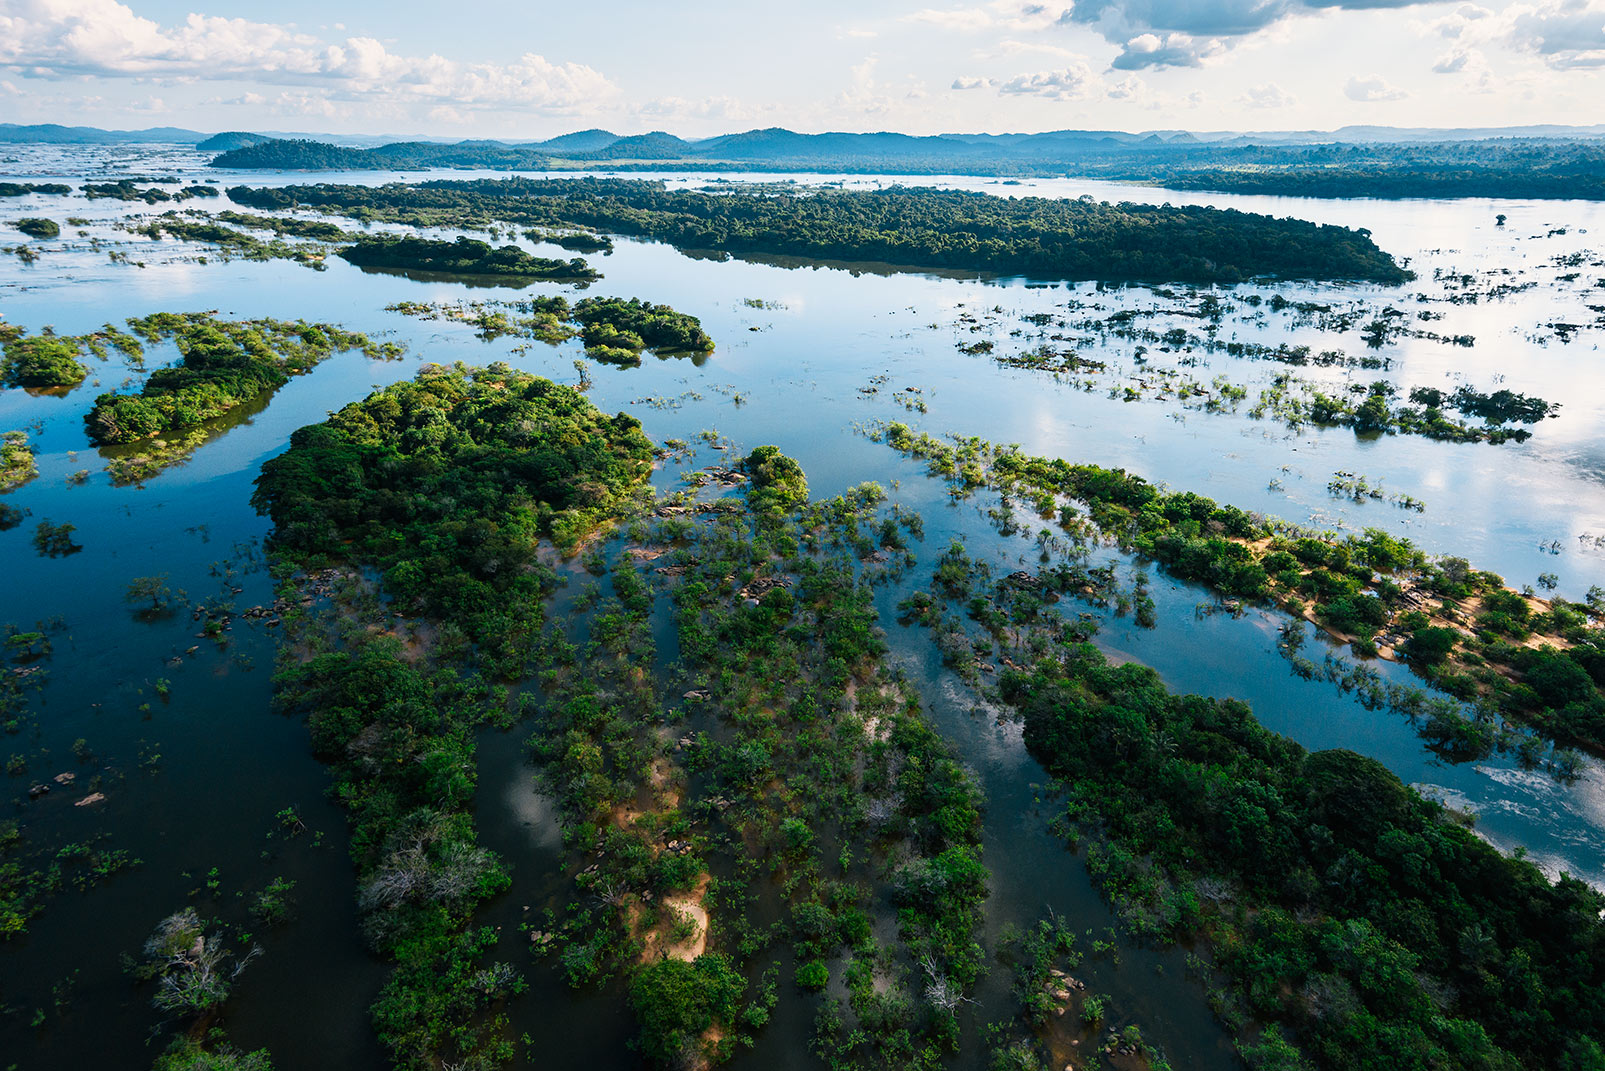 Whatever happens in the Amazon Basin will affect far more than just Brazil. The country is the world’s seventh largest emitter of greenhouse gases, with just over 30 percent caused by deforestation in 2014. Photo © Kevin Arnold